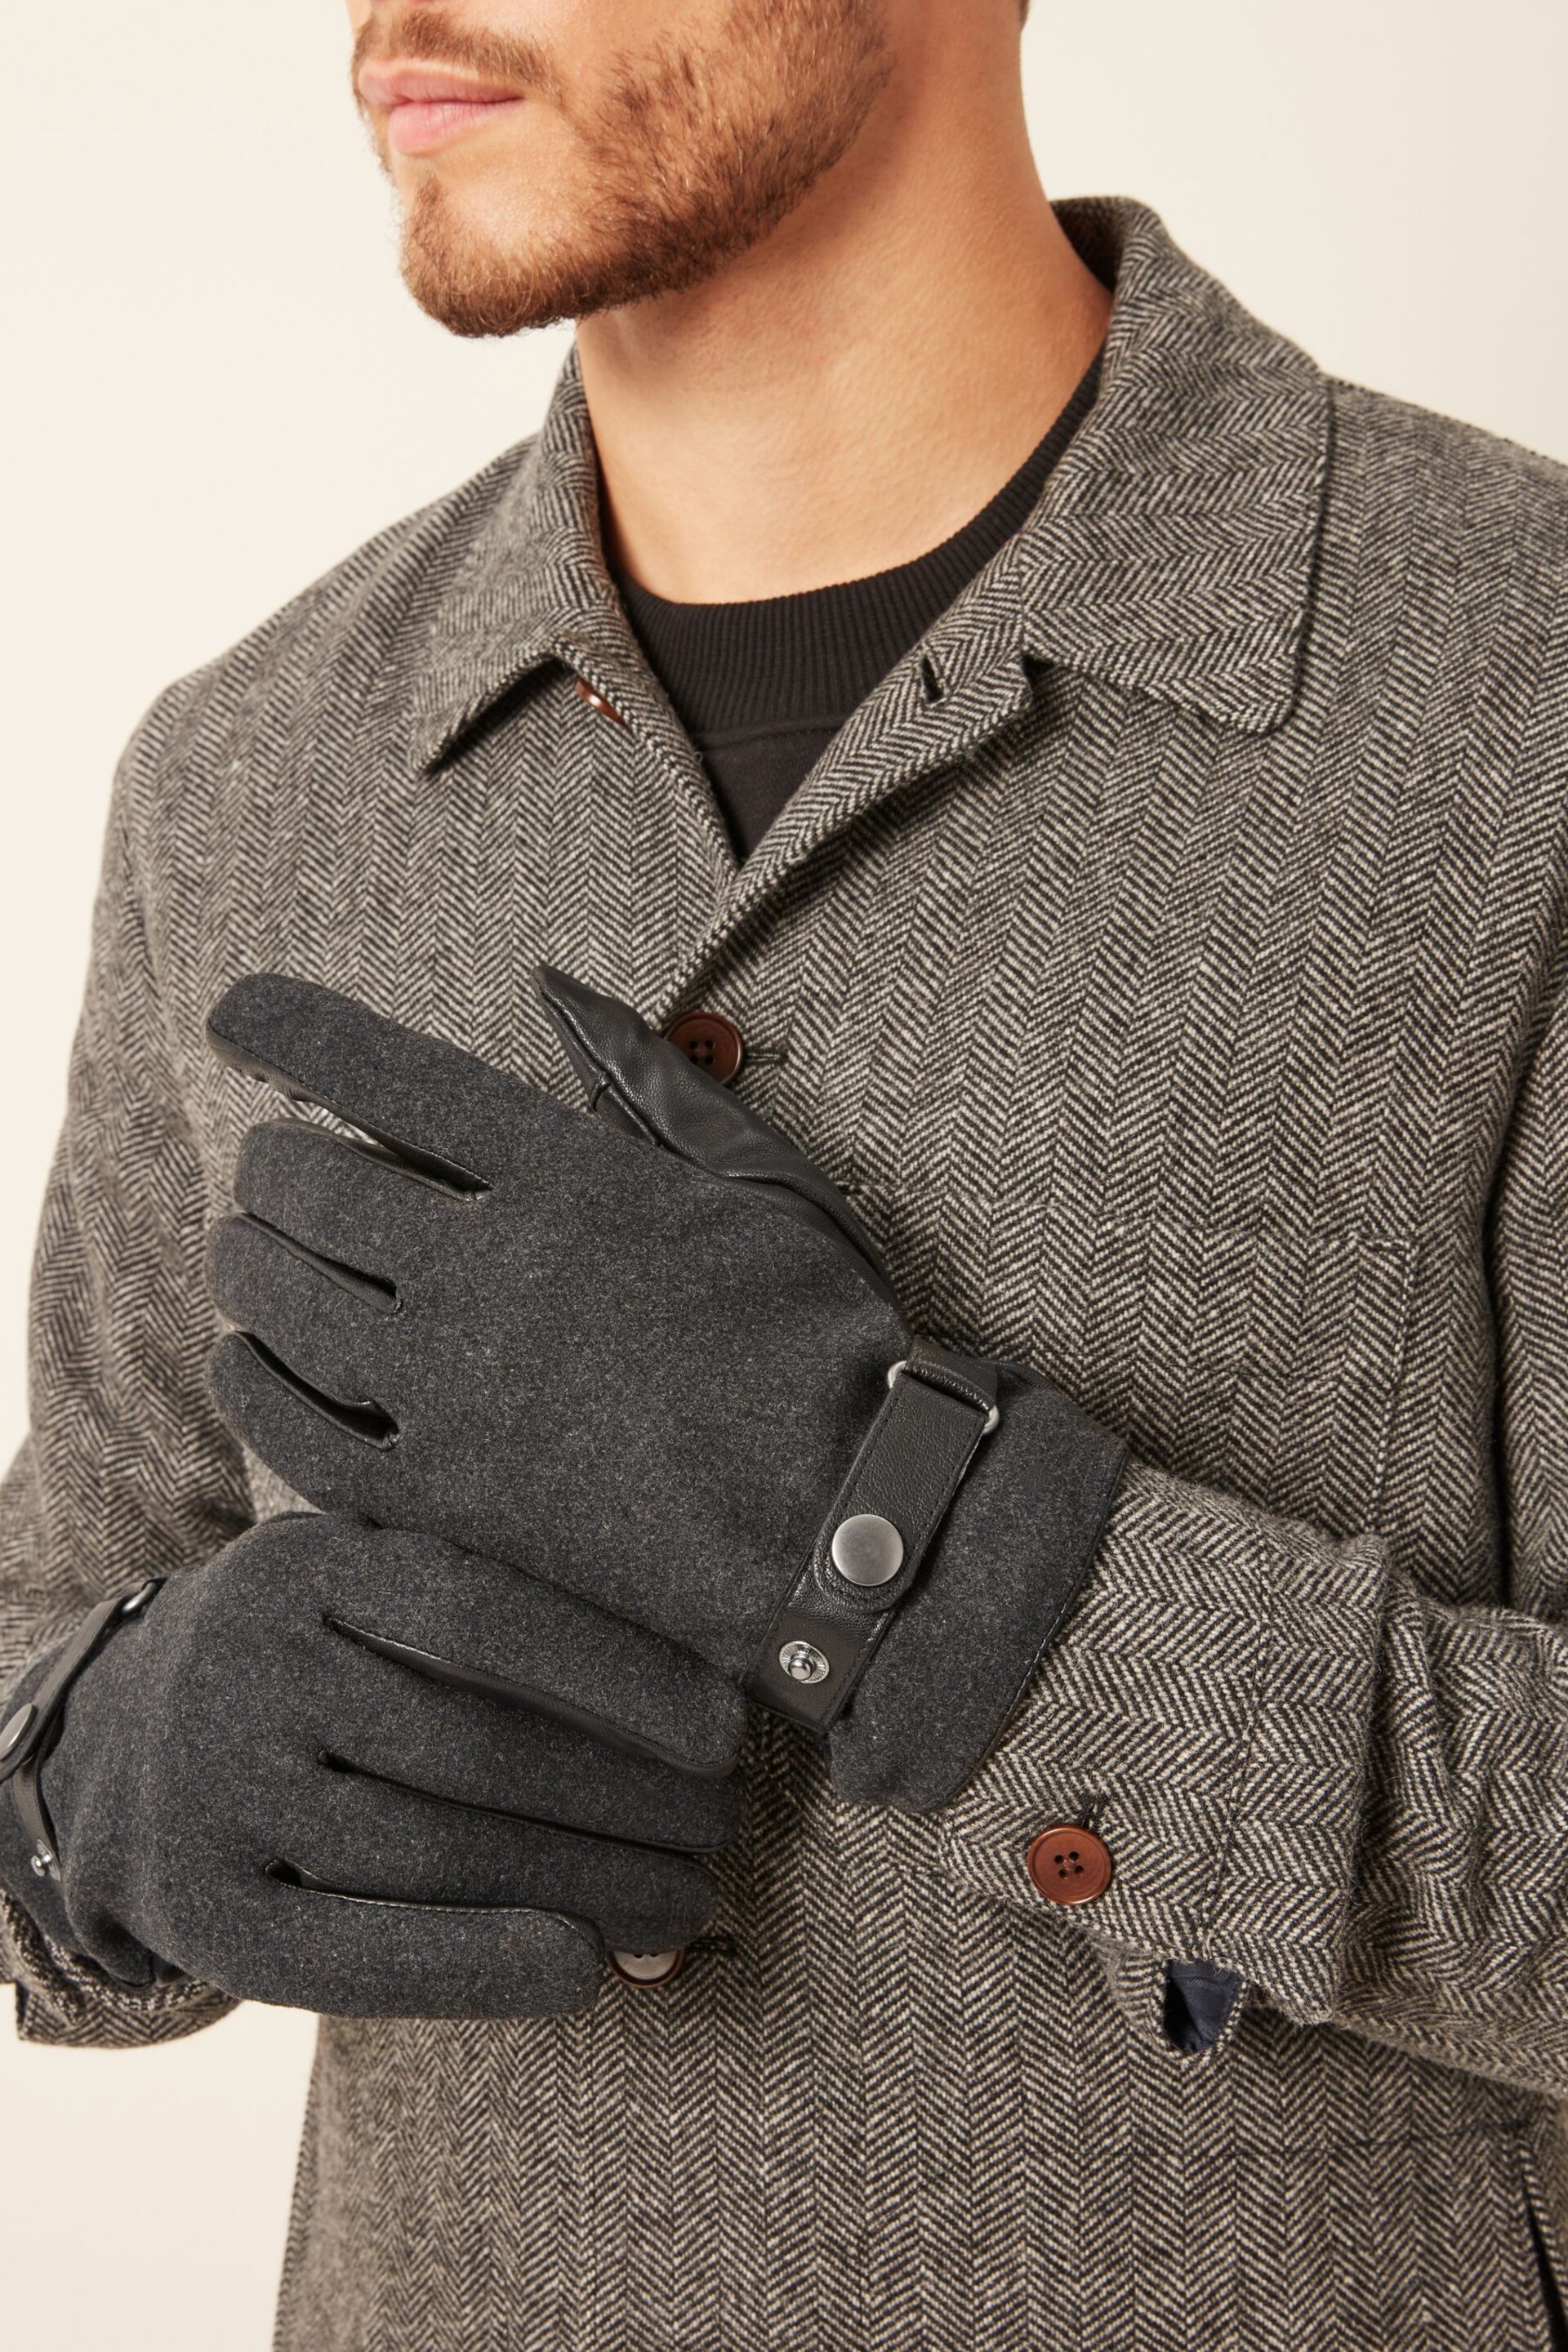 Charcoal Grey Leather Gloves - Image 1 of 3